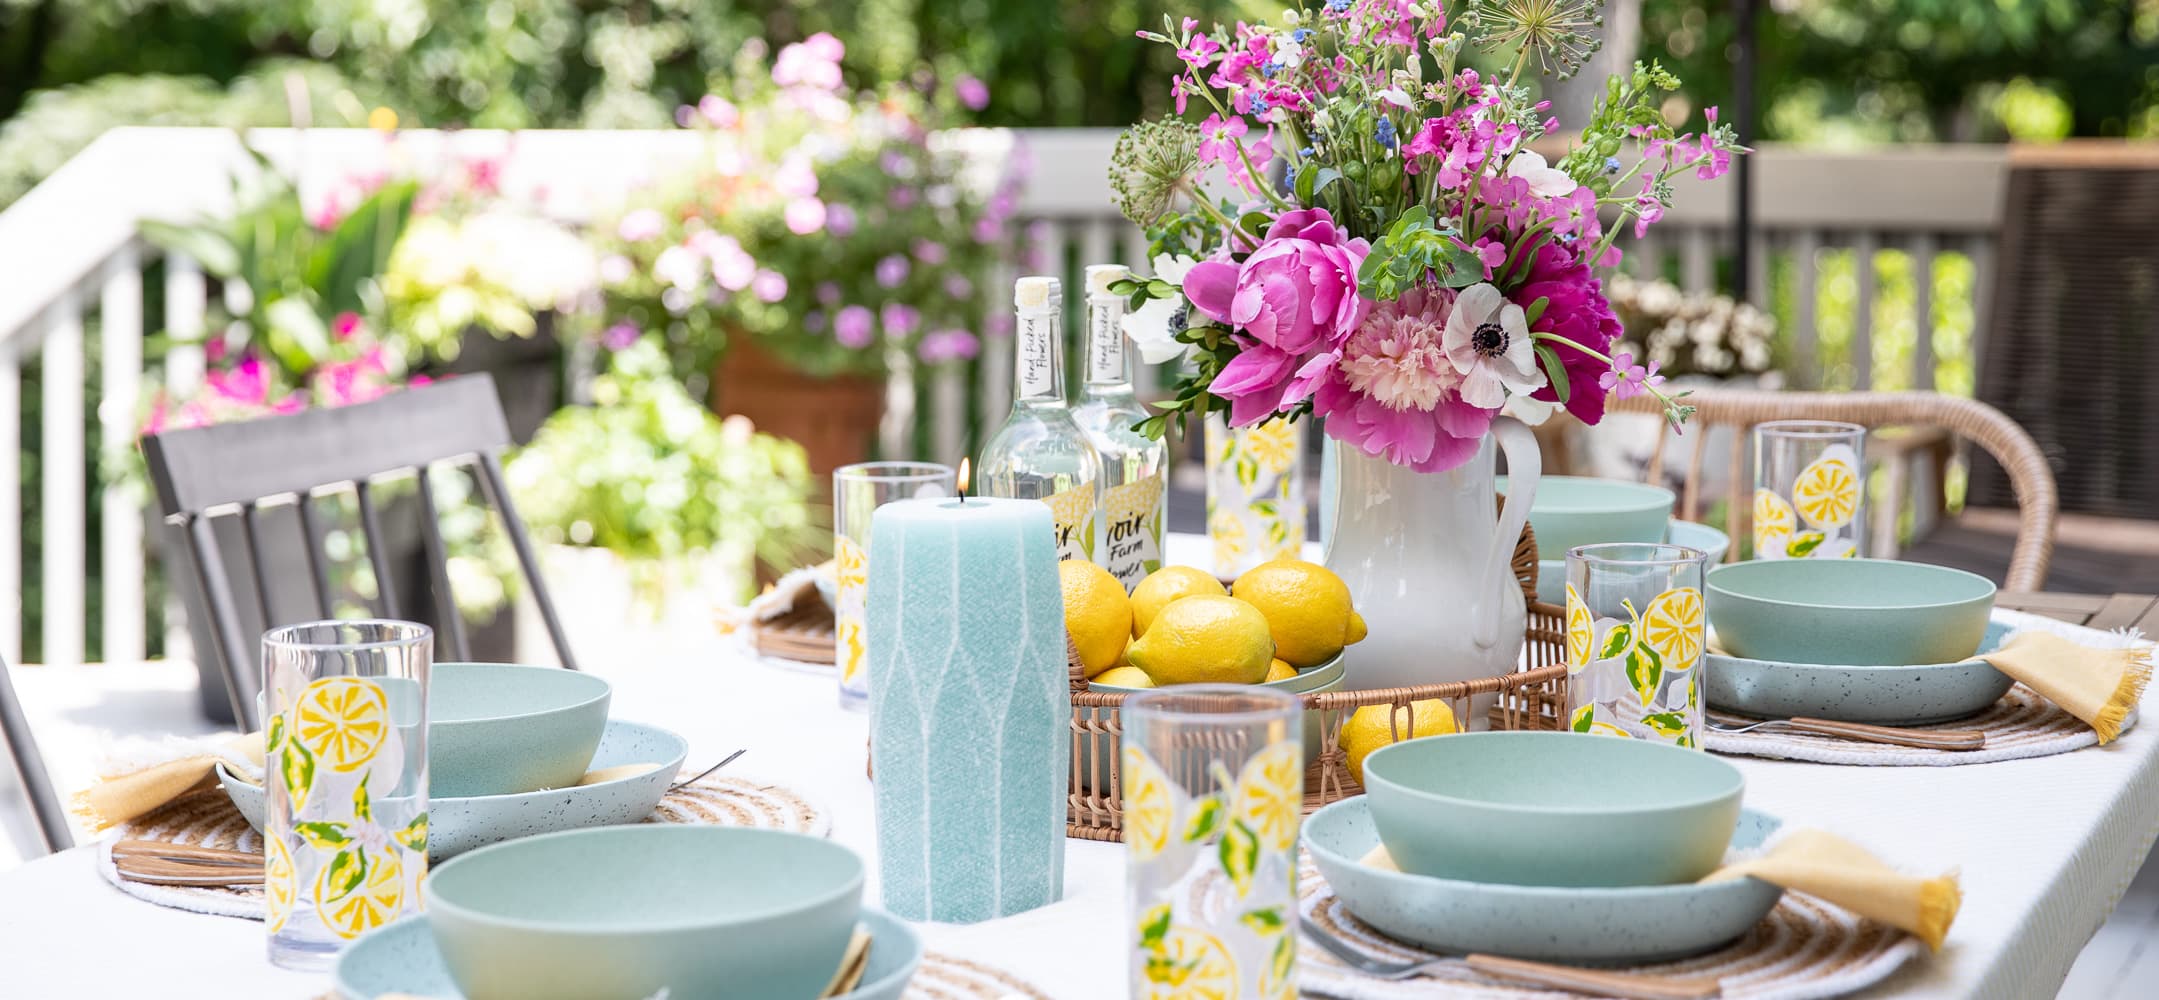 beautiful and colorful table set up outside for entertaining and dinner. 